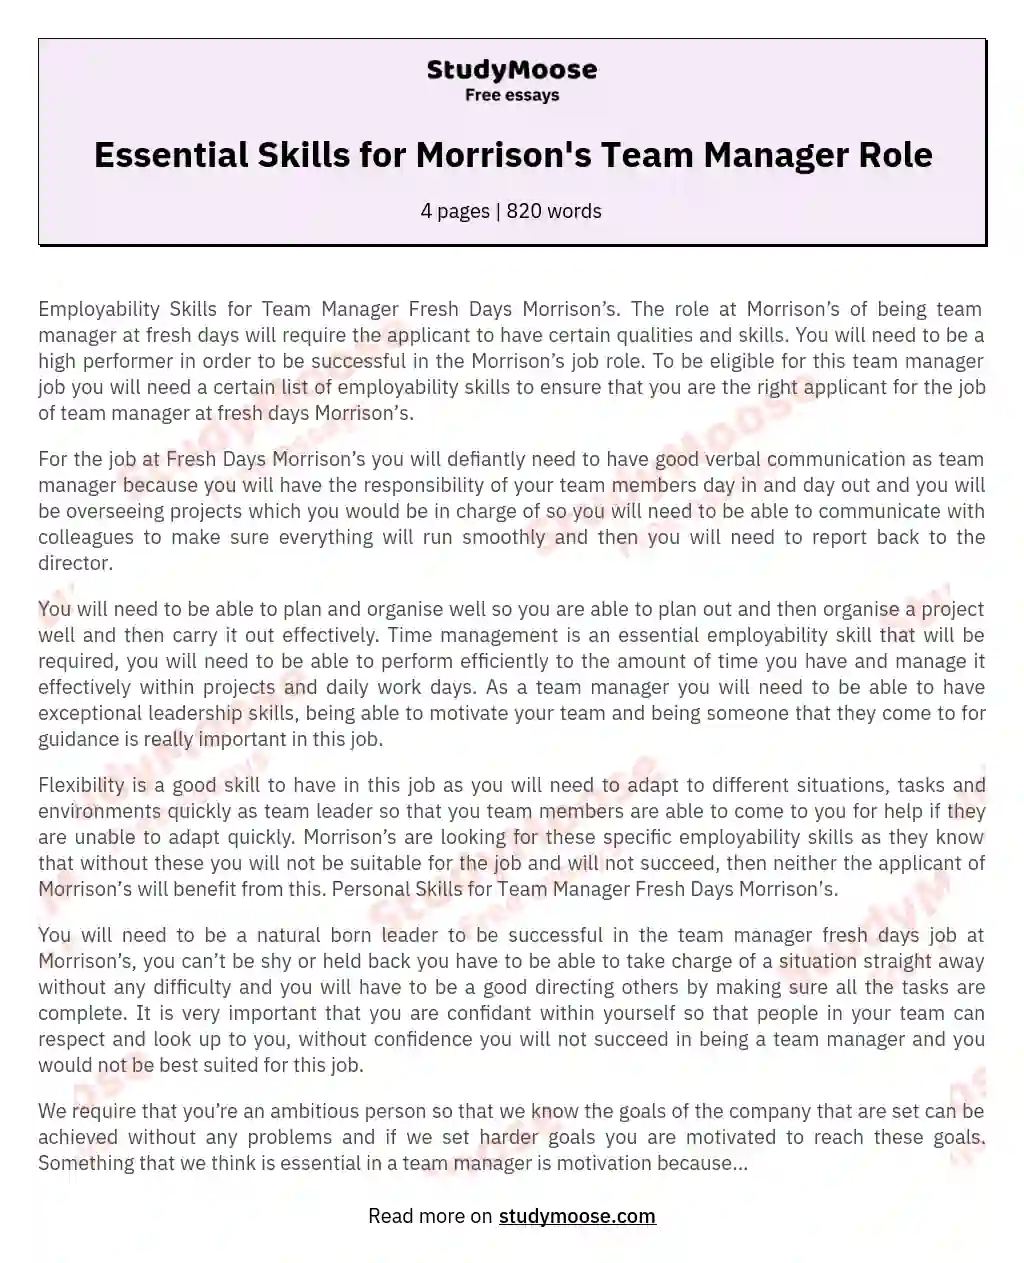 Essential Skills for Morrison's Team Manager Role essay